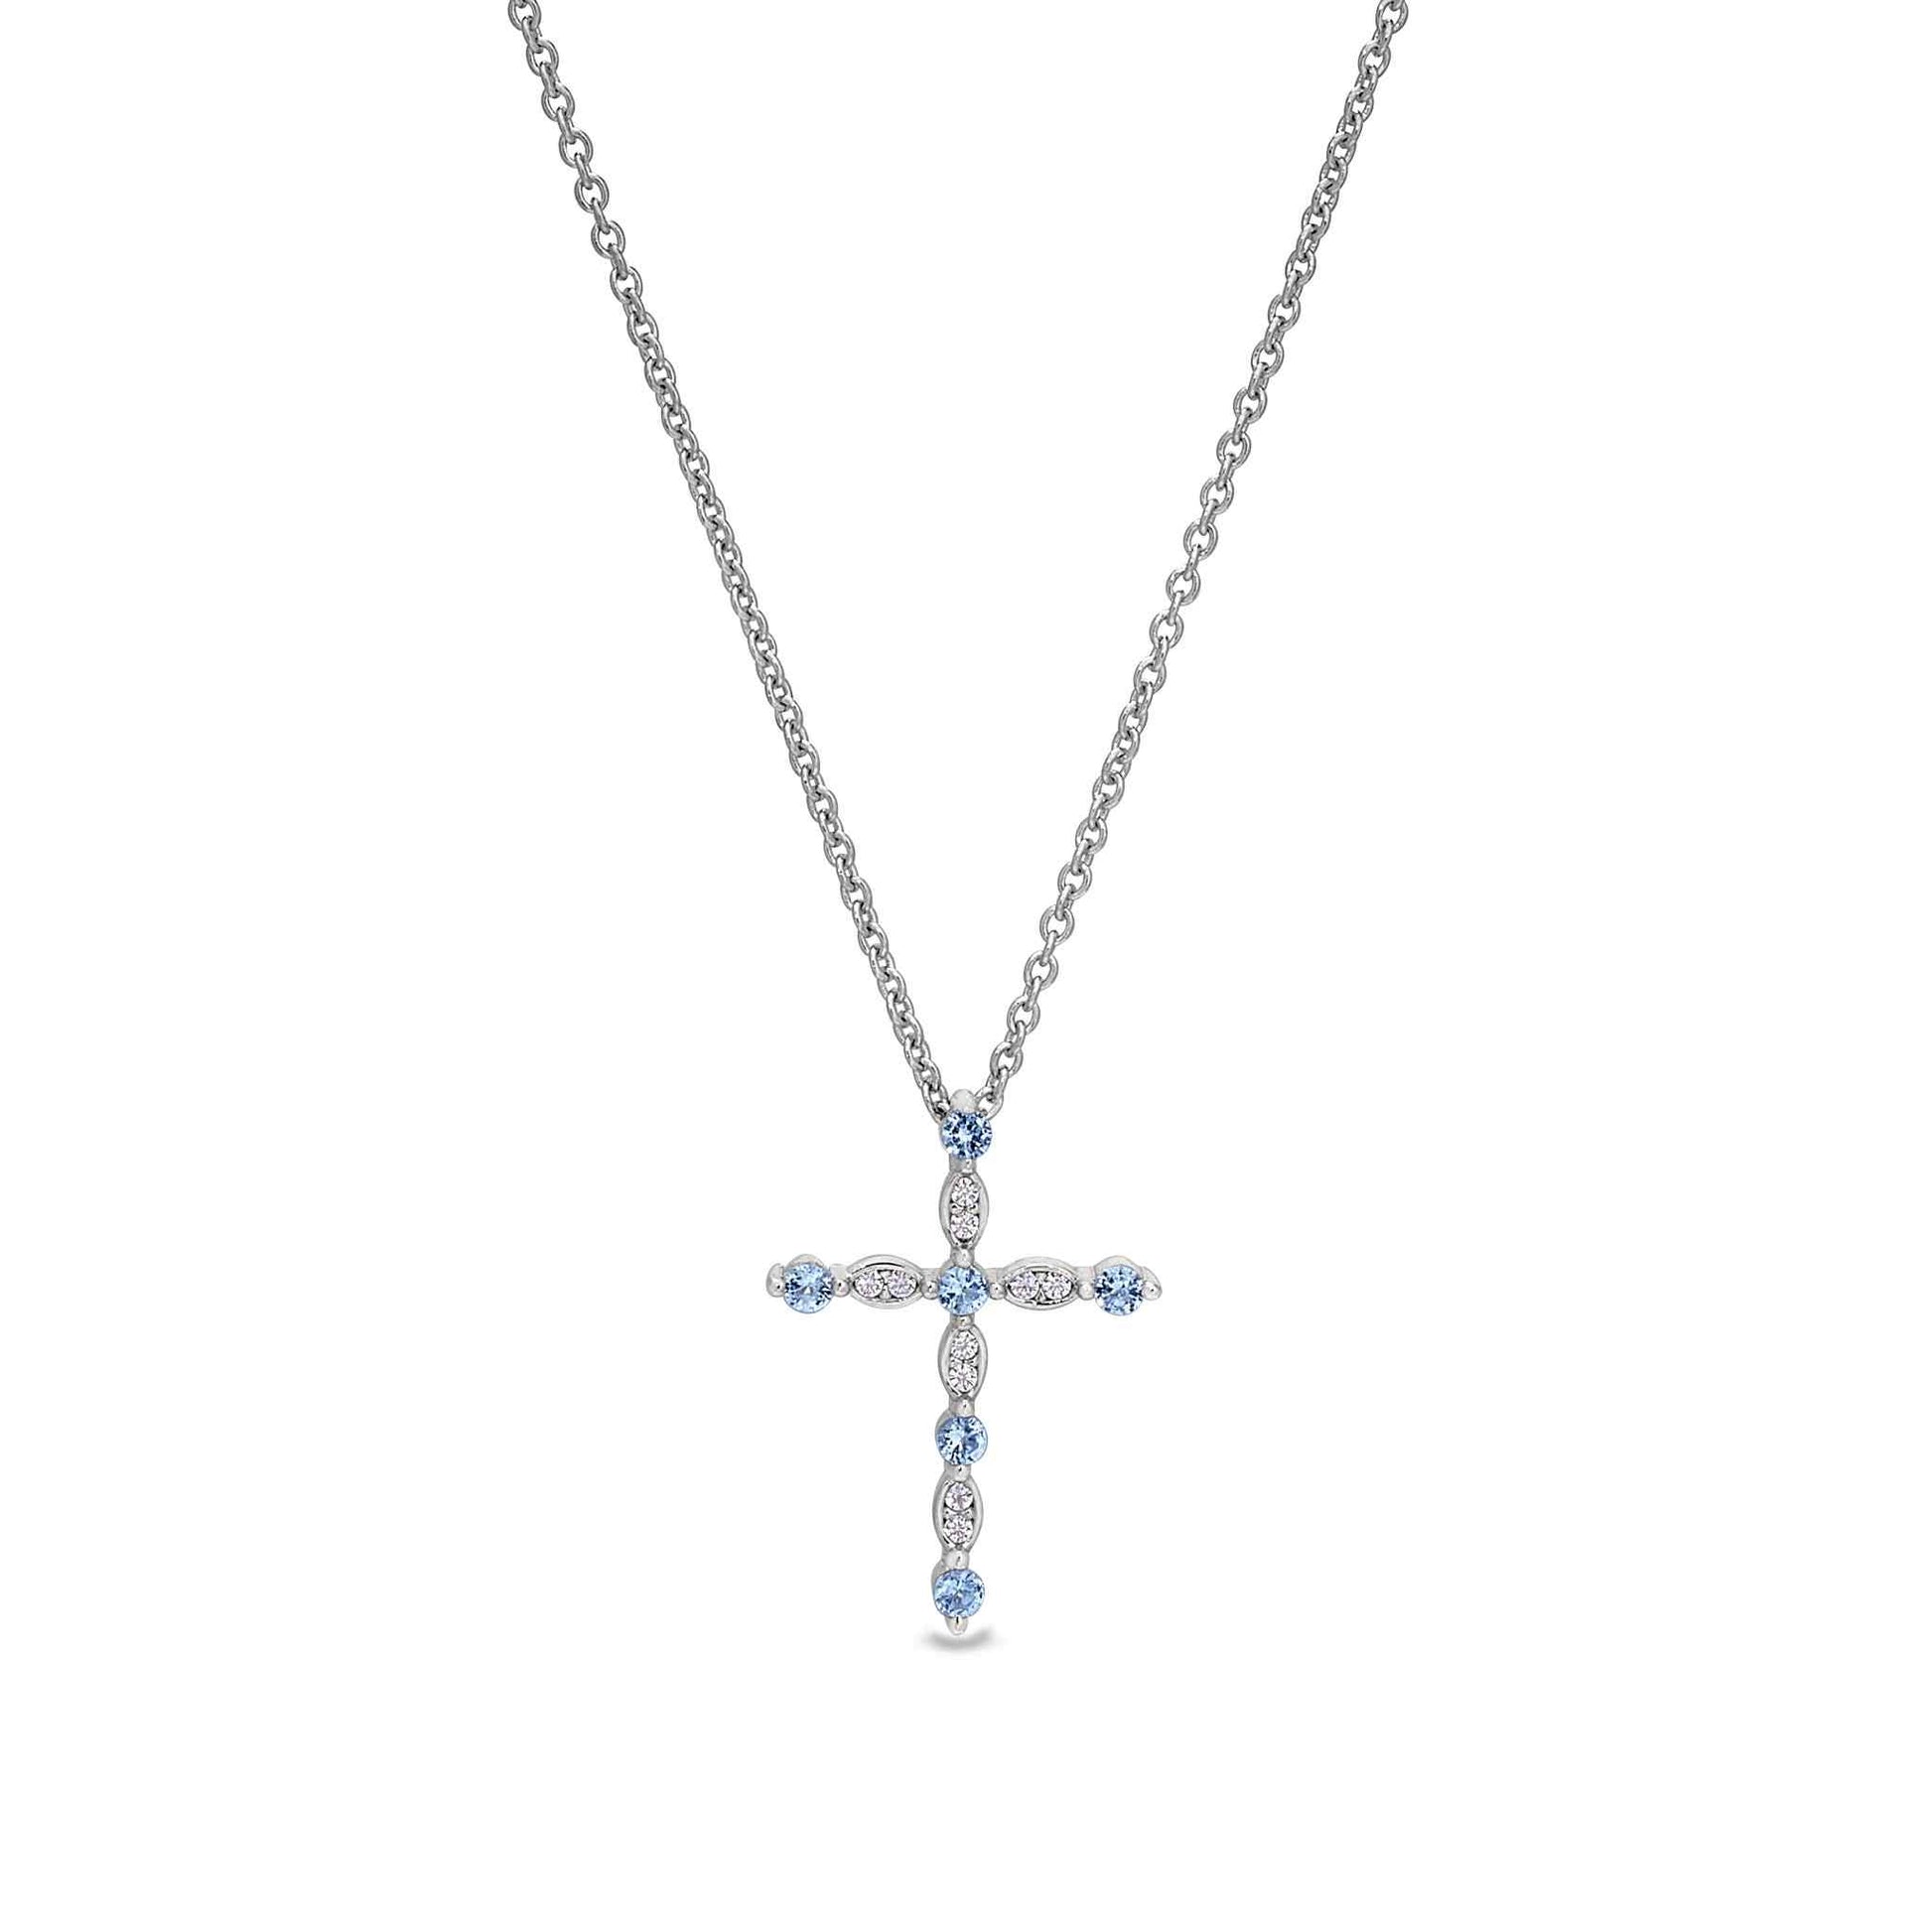 A cross necklace with simulated diamonds displayed on a neutral white background.